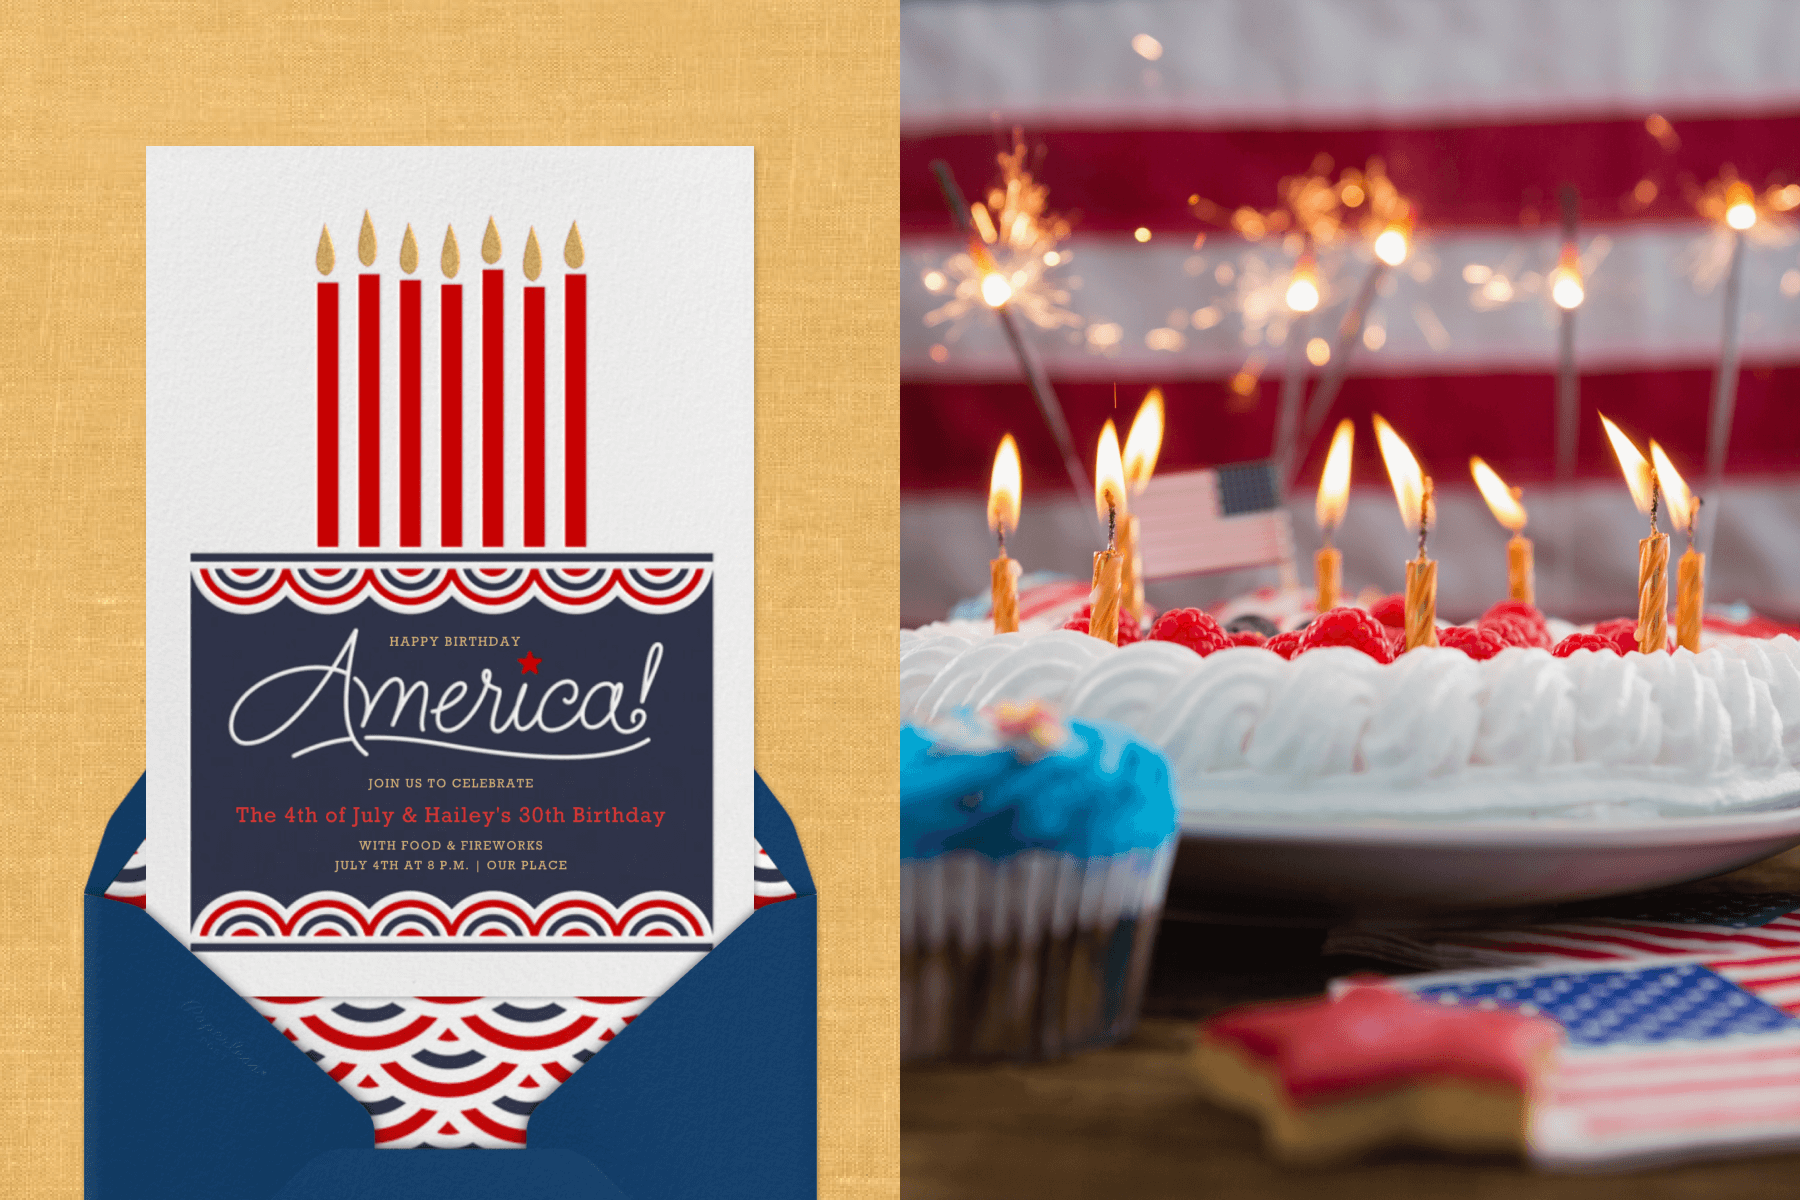 An invitation with a patriotic birthday cake and red candles on top with a blue envelope and patriotic bunting liner; a pie with raspberries and white icing has candles and sparklers lit on top.